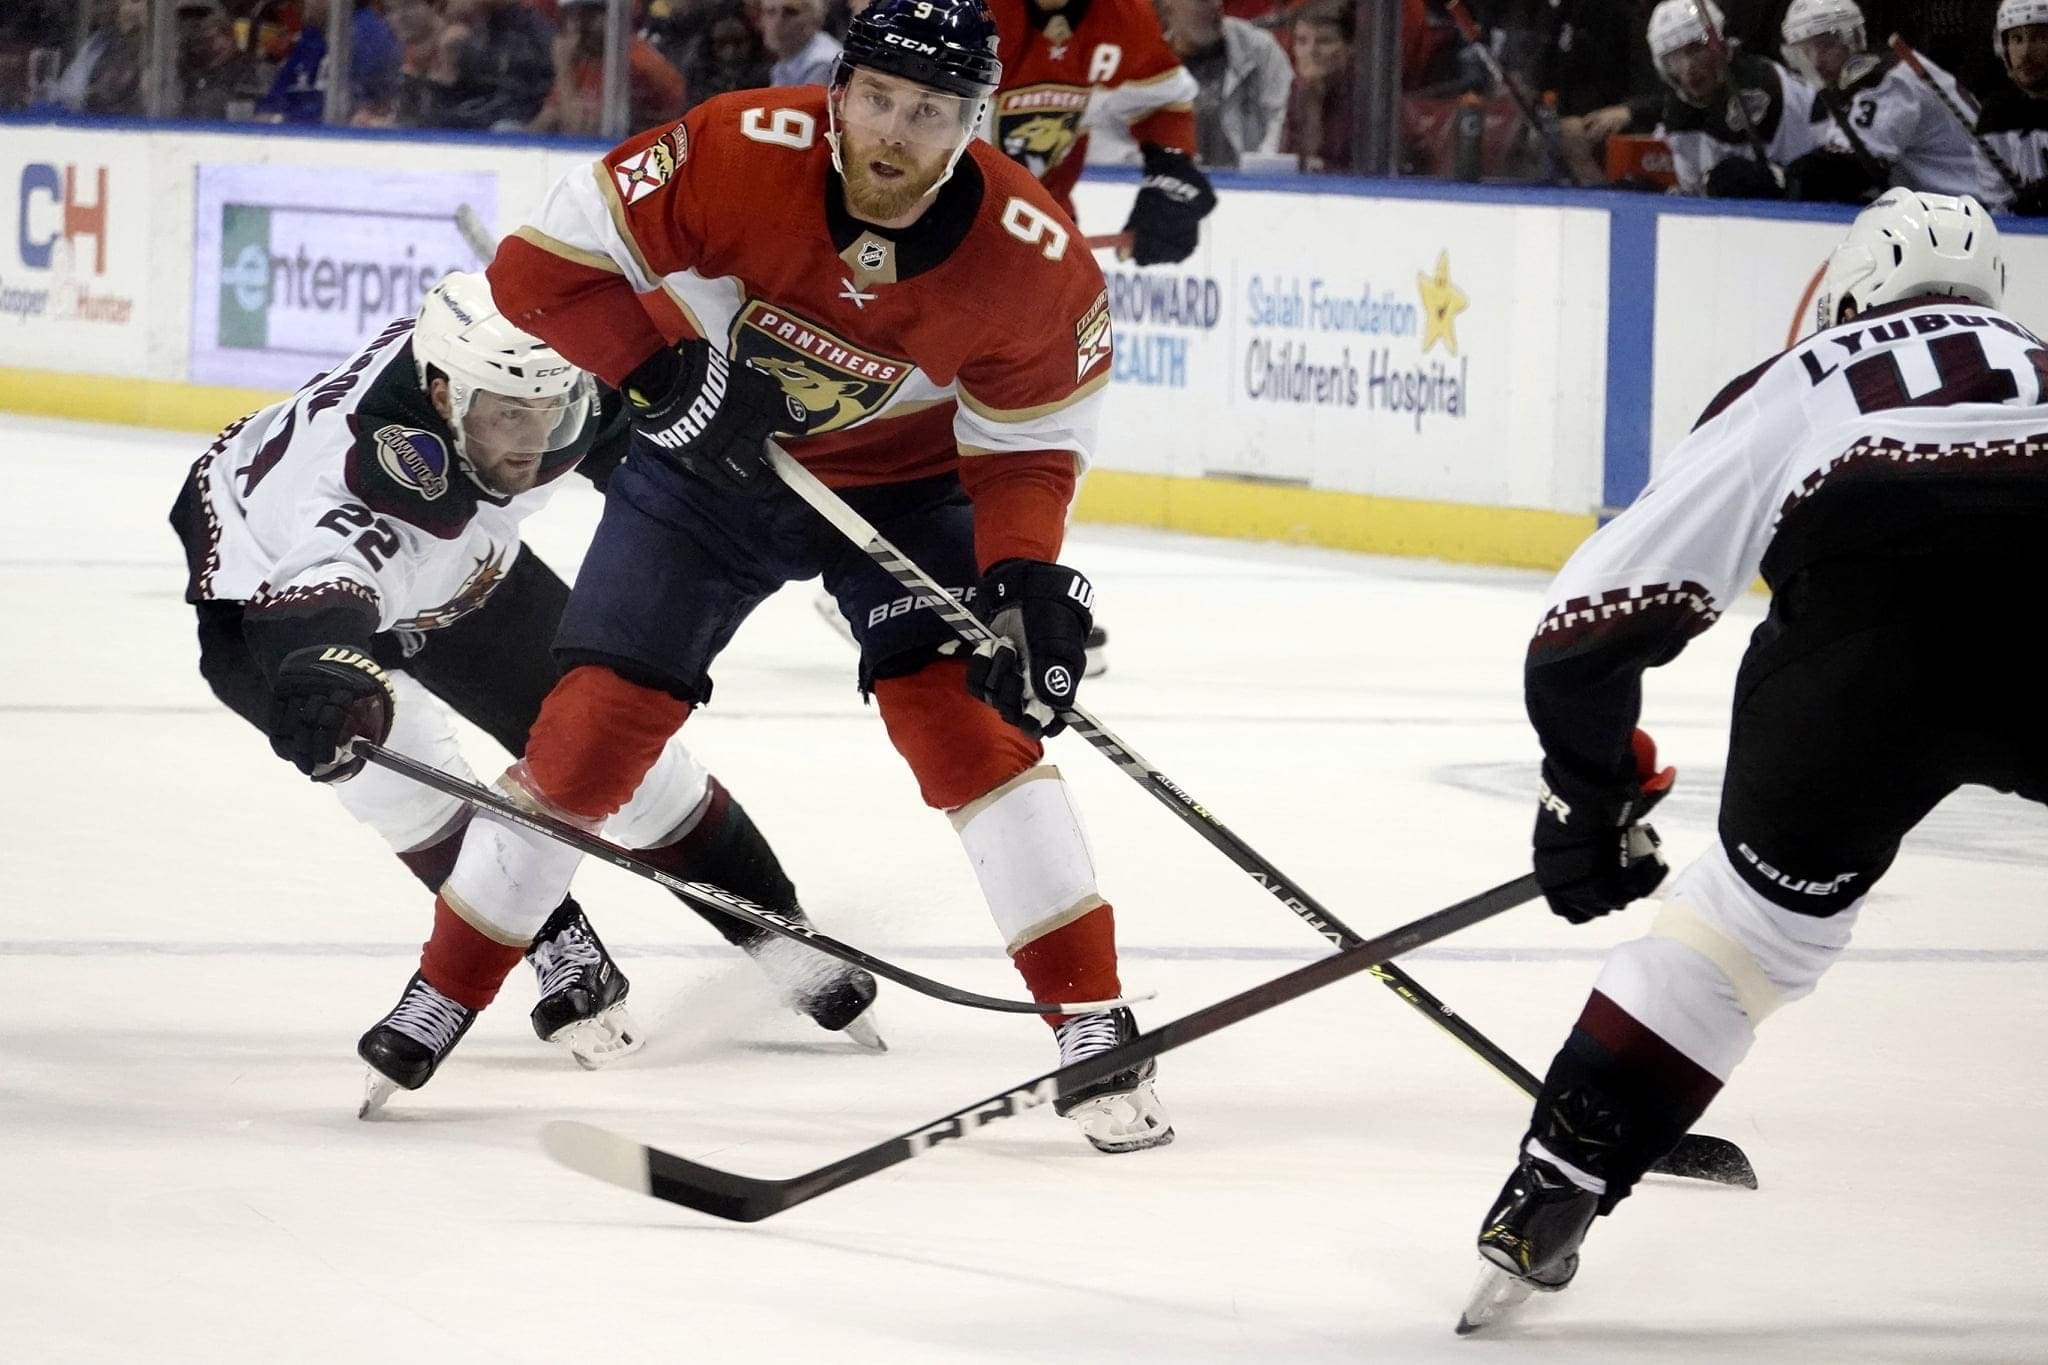 Sam Bennett: The 'Swiss Army Knife' of the Florida Panthers